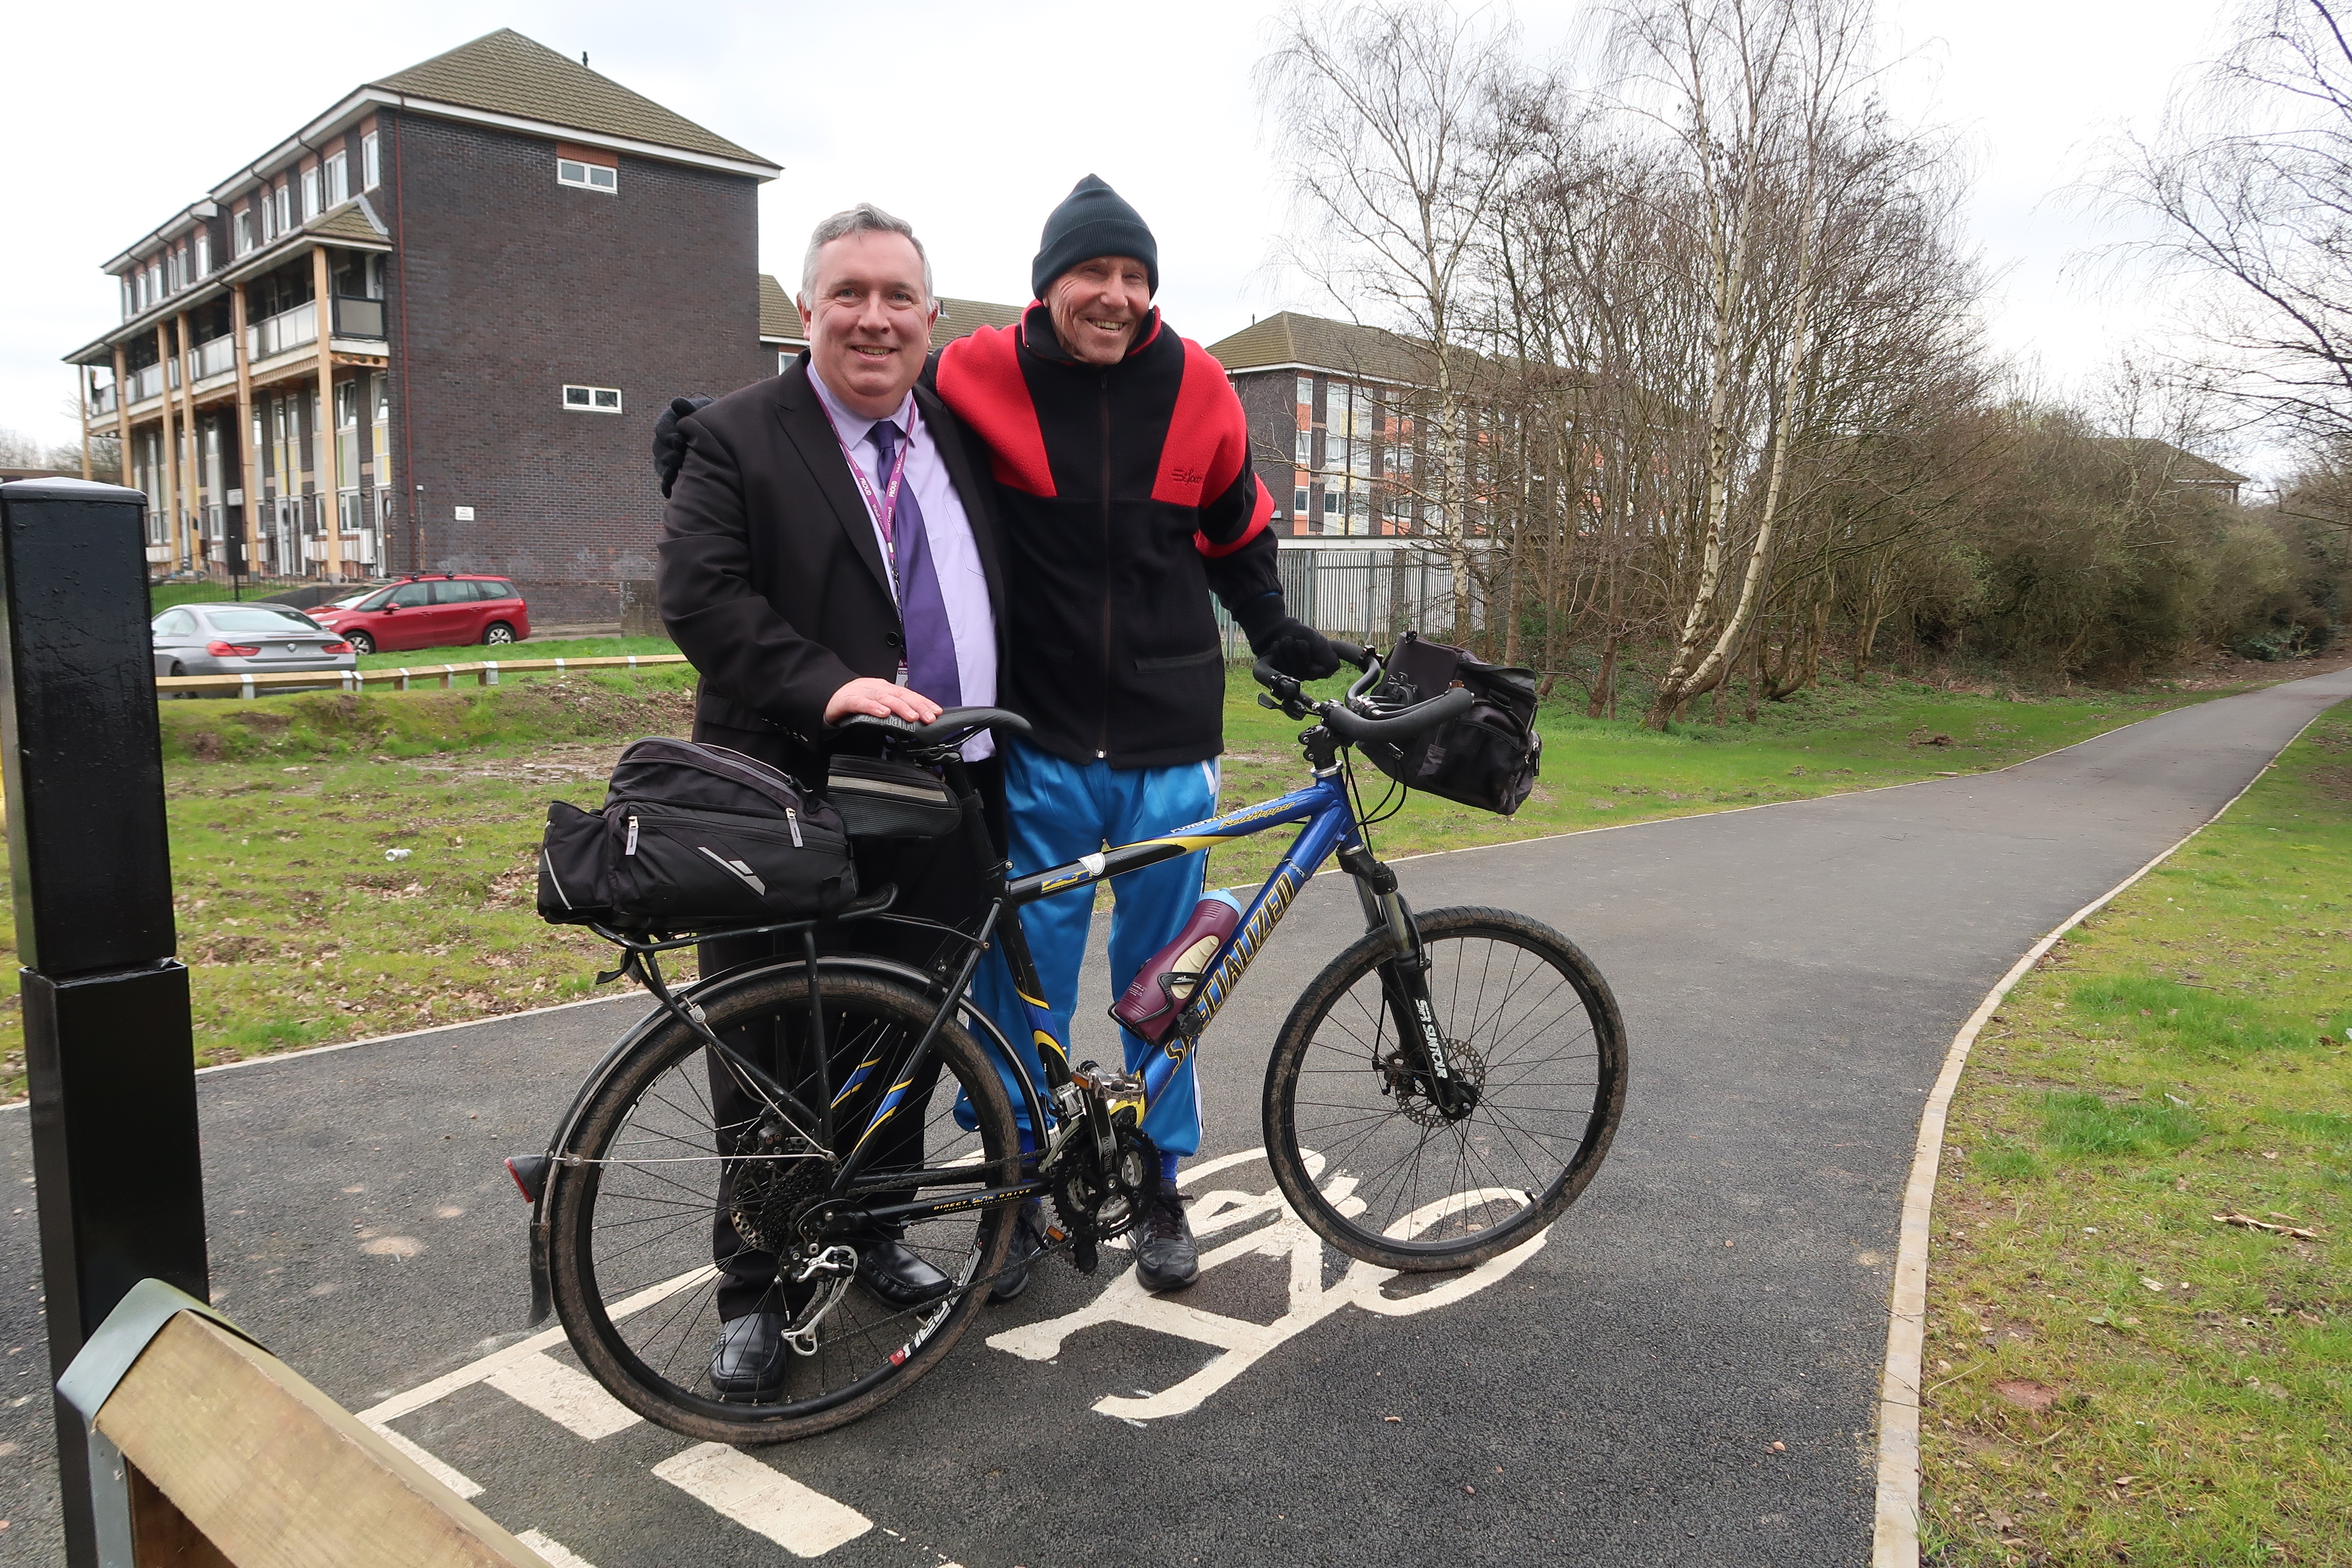 Councillor Adrian Andrew stands next to a cyclist on a cycle path, both smile towards the camera